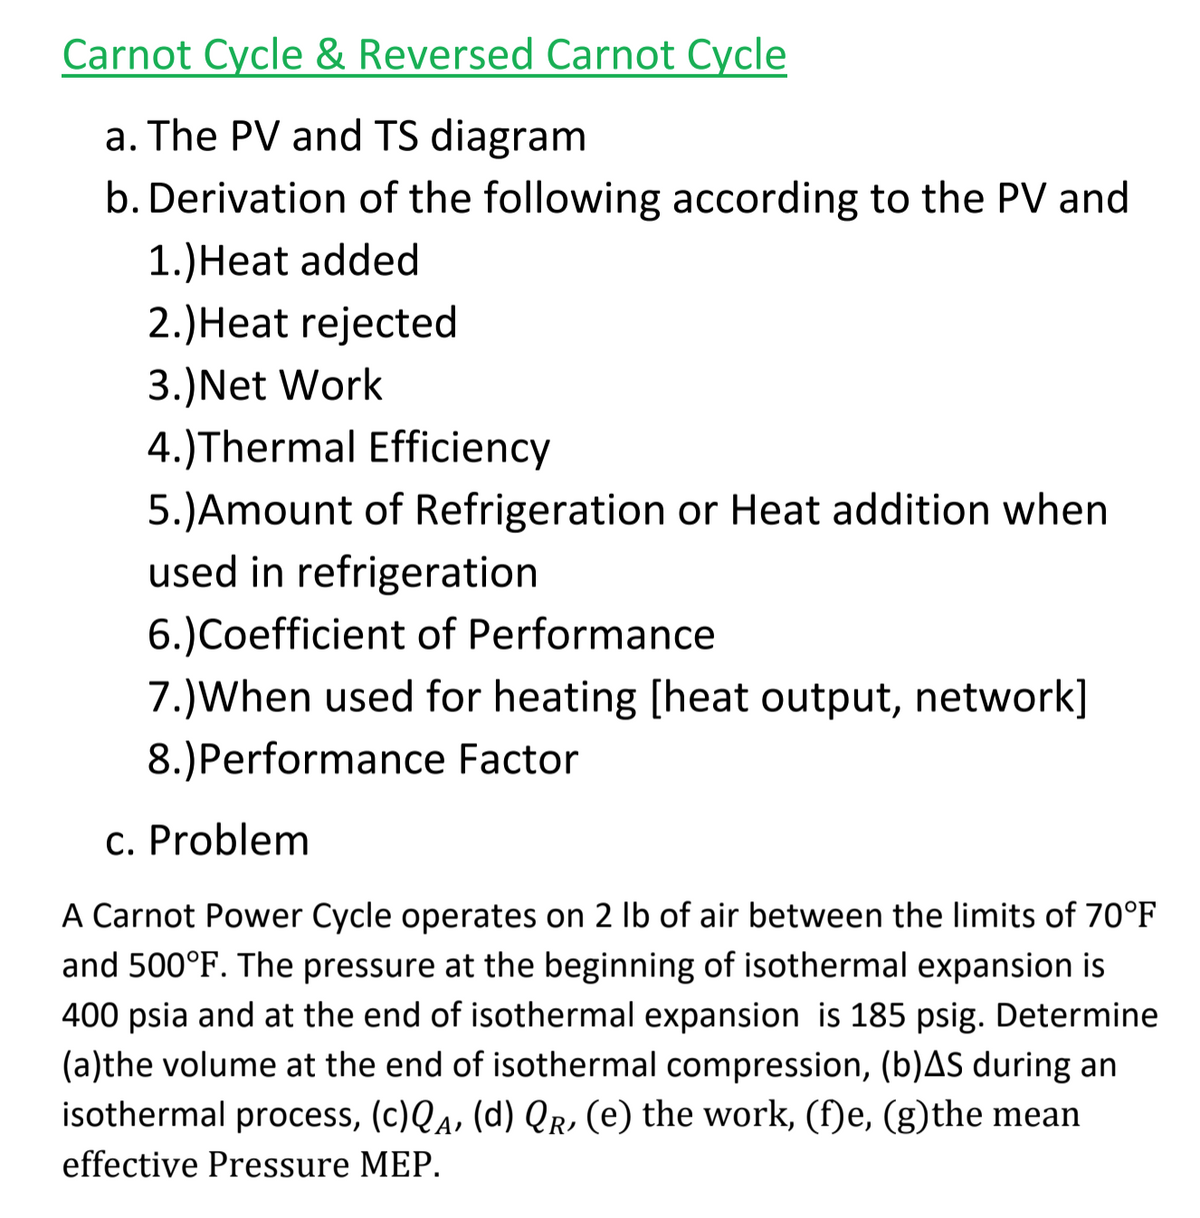 Carnot Cycle & Reversed Carnot Cycle
a. The PV and TS diagram
b. Derivation of the following according to the PV and
1.)Heat added
2.)Heat rejected
3.)Net Work
4.)Thermal Efficiency
5.)Amount of Refrigeration or Heat addition when
used in refrigeration
6.)Coefficient of Performance
7.)When used for heating [heat output, network]
8.)Performance Factor
c. Problem
A Carnot Power Cycle operates on 2 Ib of air between the limits of 70°F
and 500°F. The pressure at the beginning of isothermal expansion is
400 psia and at the end of isothermal expansion is 185 psig. Determine
(a)the volume at the end of isothermal compression, (b)AS during an
isothermal process, (c)Qa, (d) Qr, (e) the work, (f)e, (g)the mean
effective
essure MEP.
